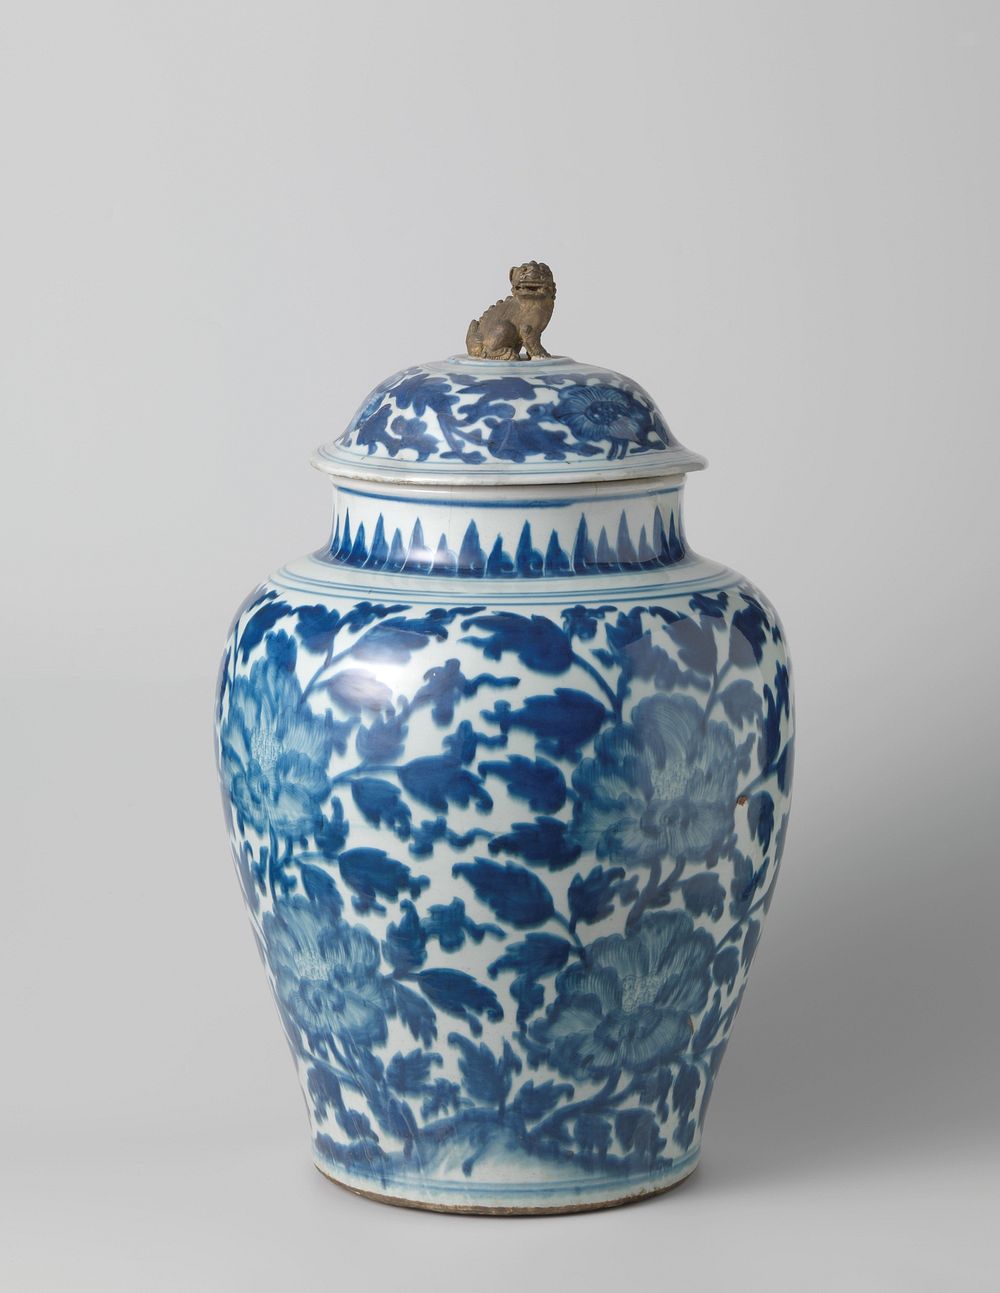 Ovoid covered jar with large peonies (c. 1675 - c. 1699) by anonymous